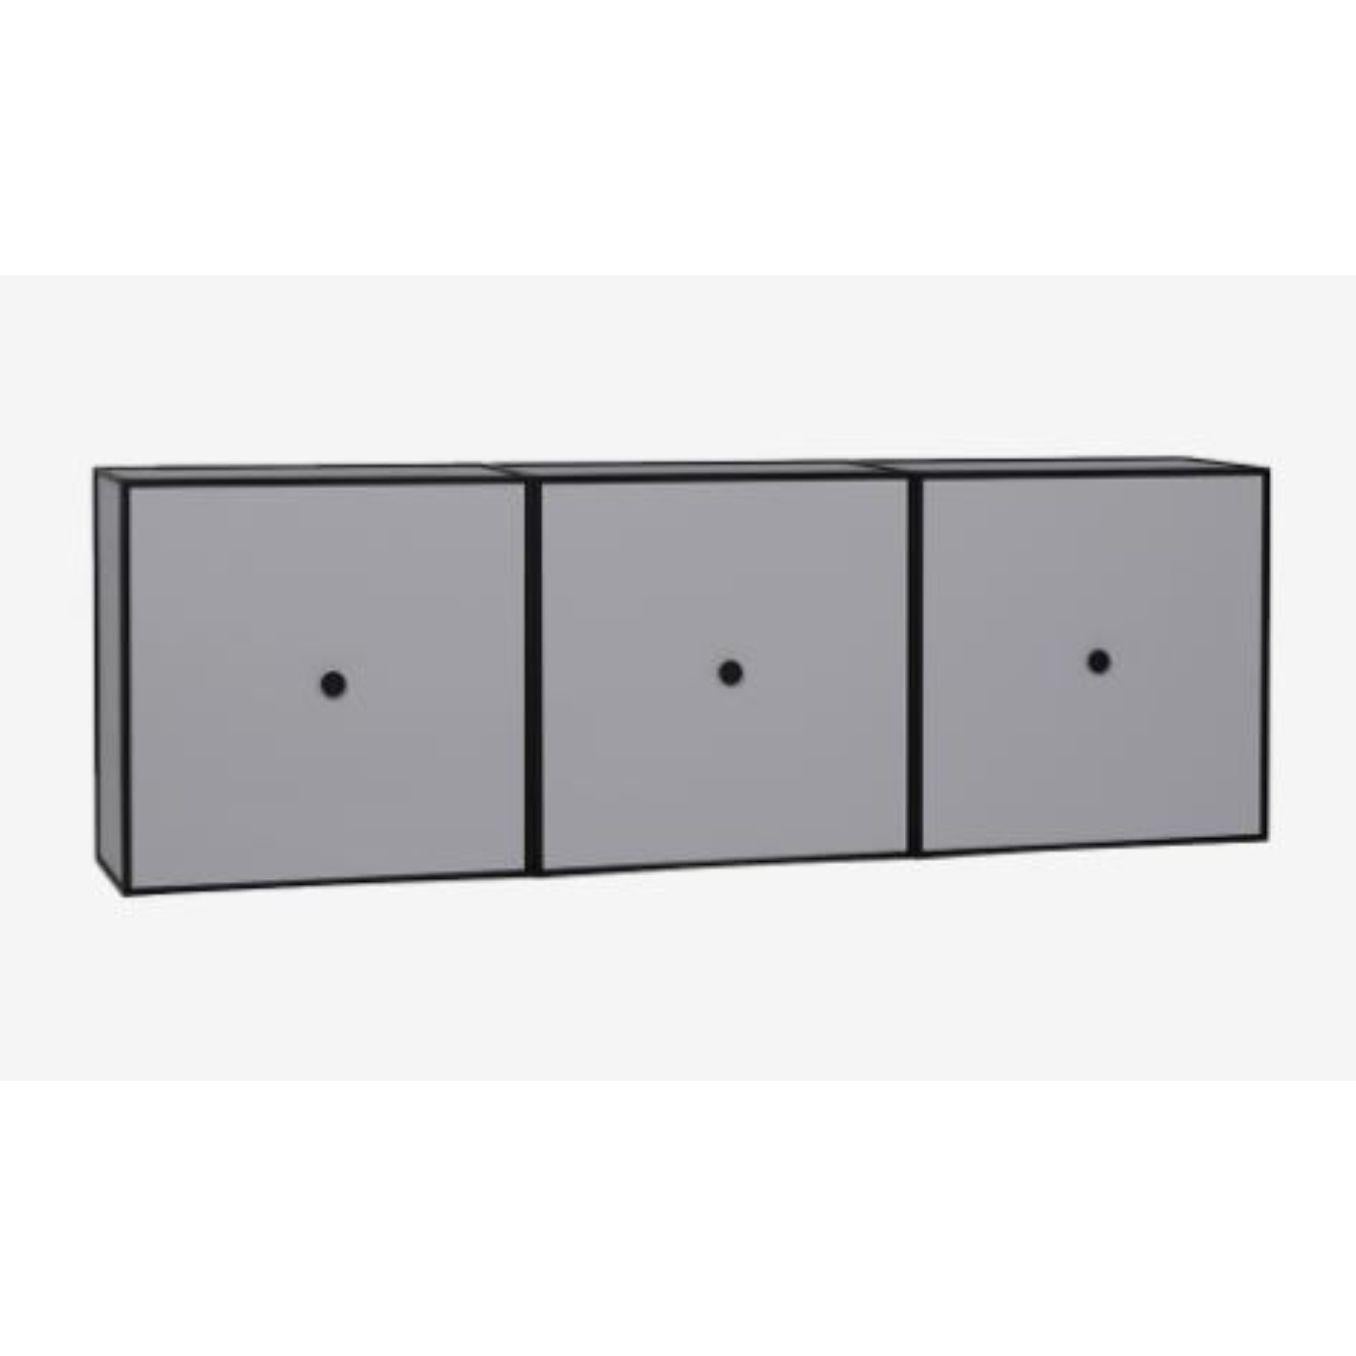 42 dark grey frame view box by Lassen
Dimensions: D 126 x W 21 x H 42 cm 
Materials: Finér, Melamin, Melamine, Metal, Veneer
Also available in different colors and dimensions. 
Weight: 22.80 Kg

By Lassen is a Danish design brand focused on